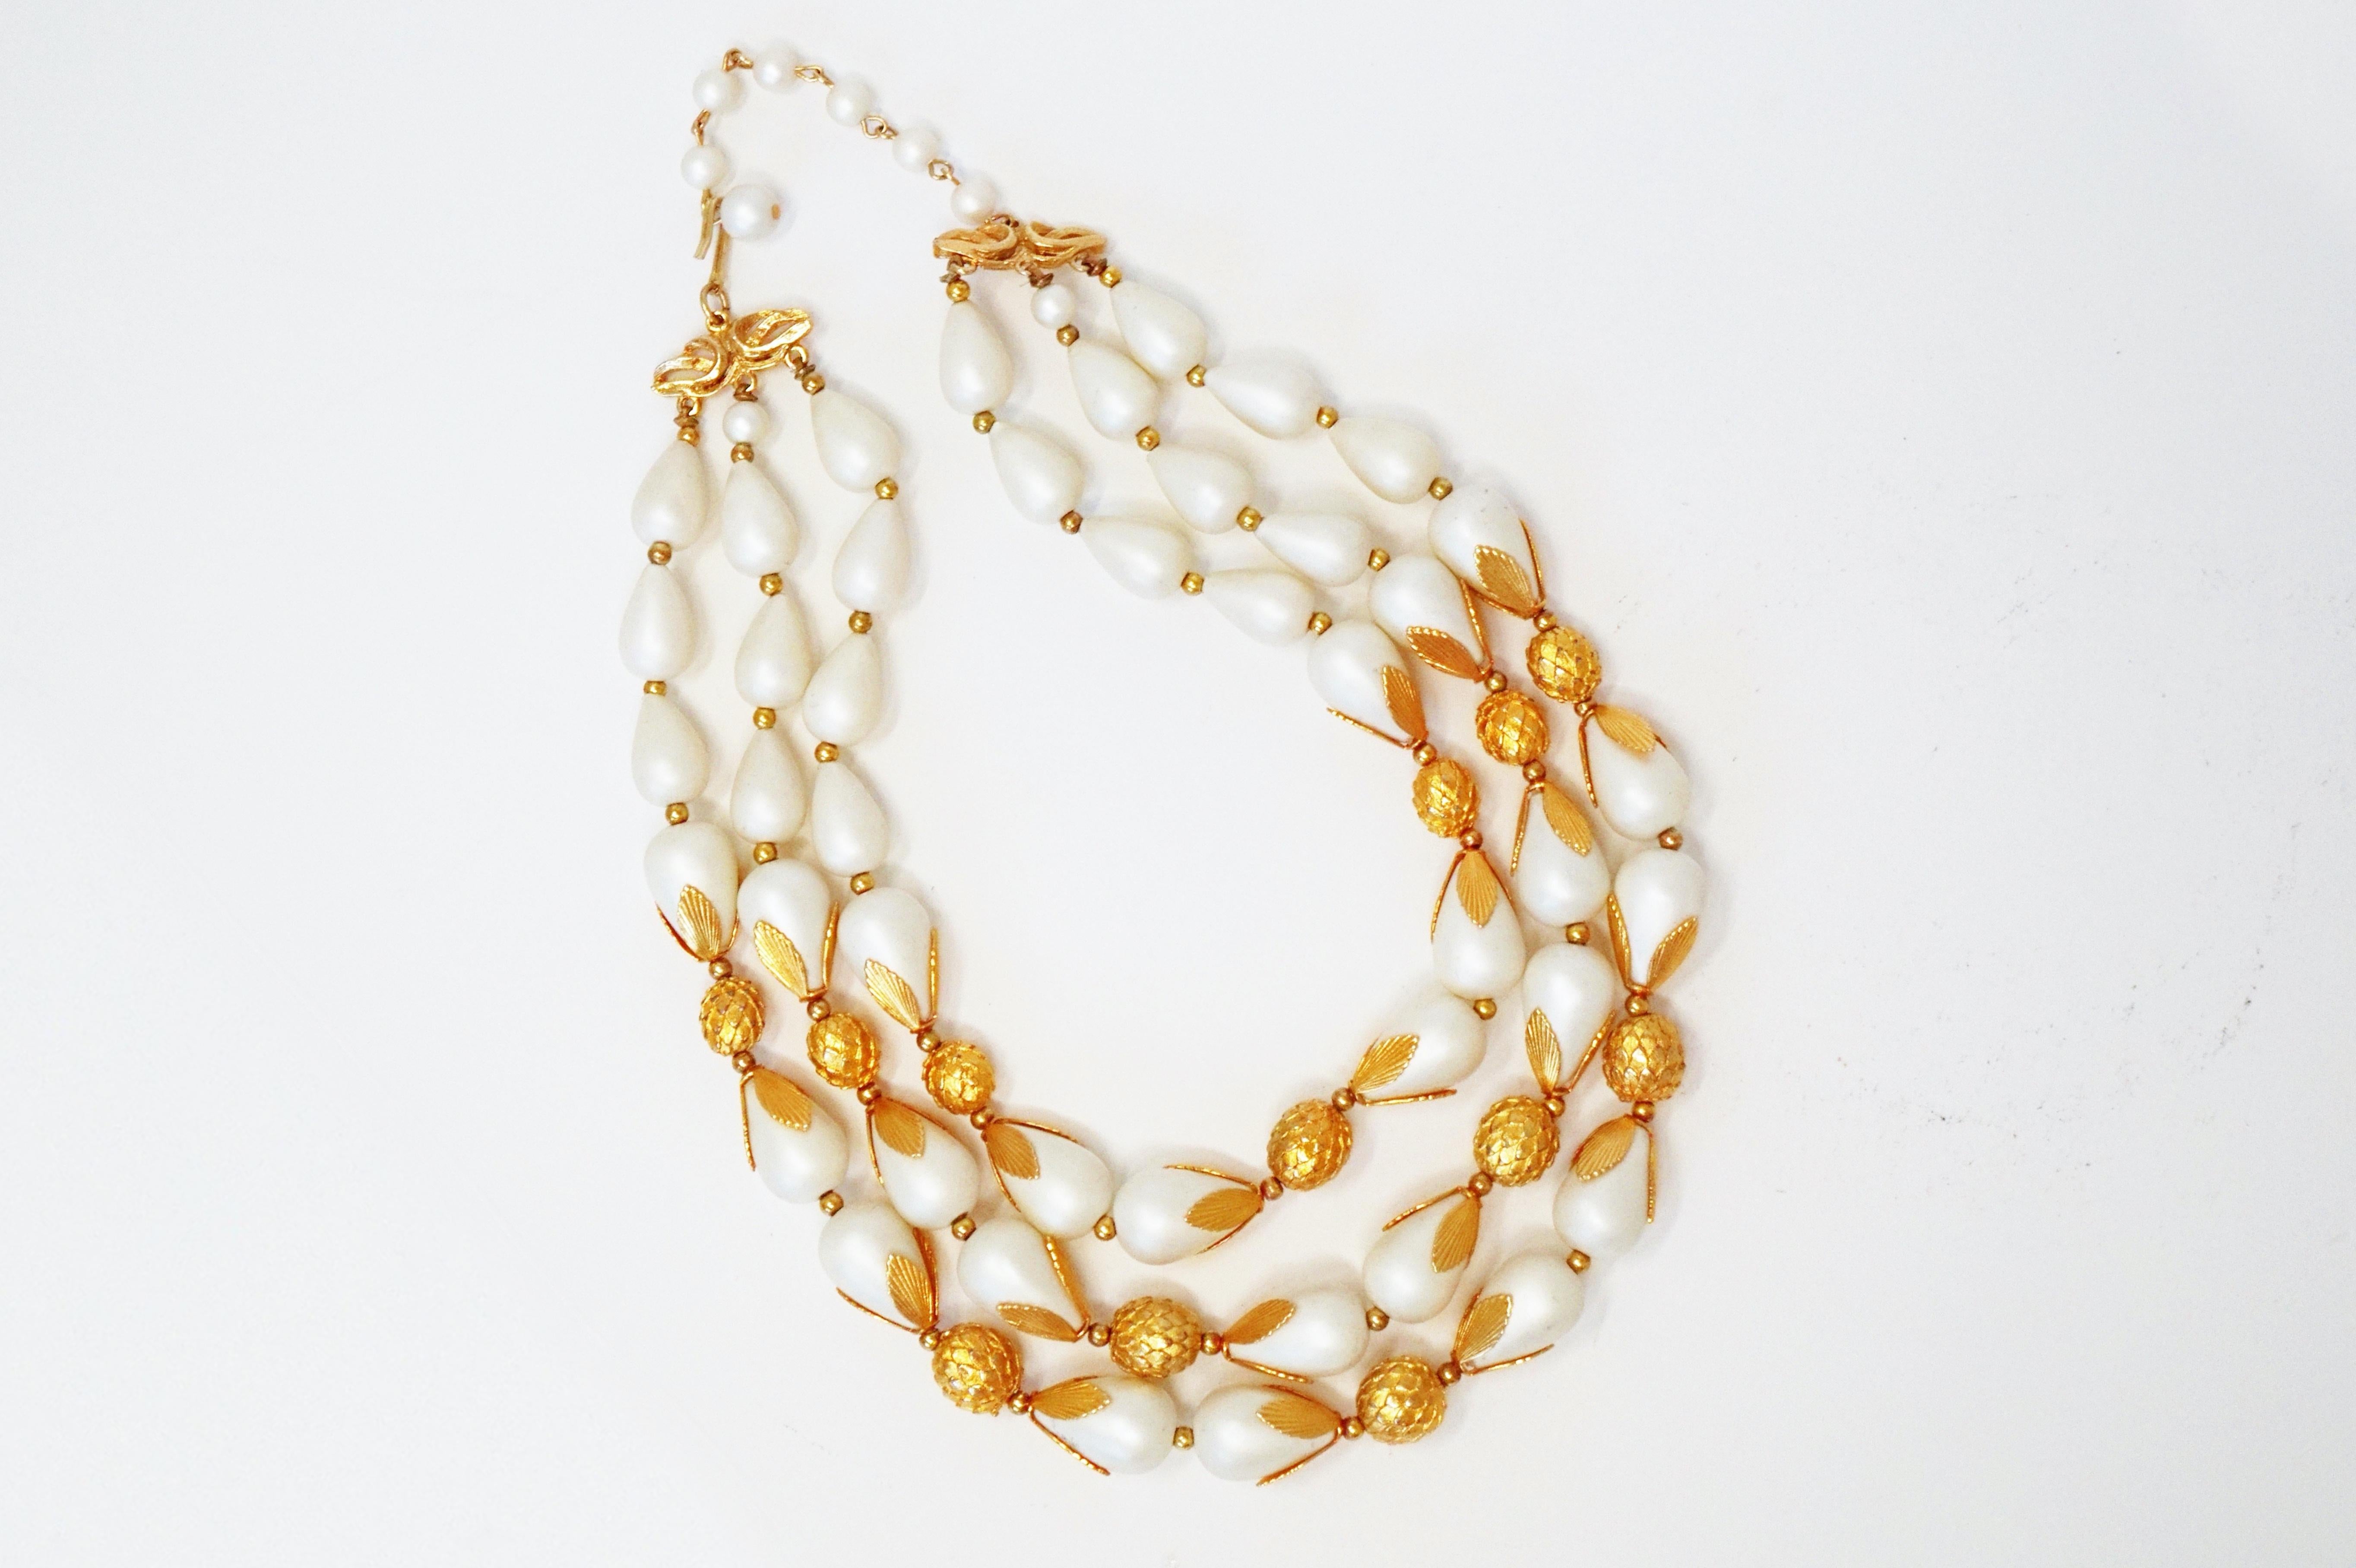 Triple Strand Gilt Costume Statement Necklace by Deauville, Signed, circa 1950 In Good Condition For Sale In McKinney, TX